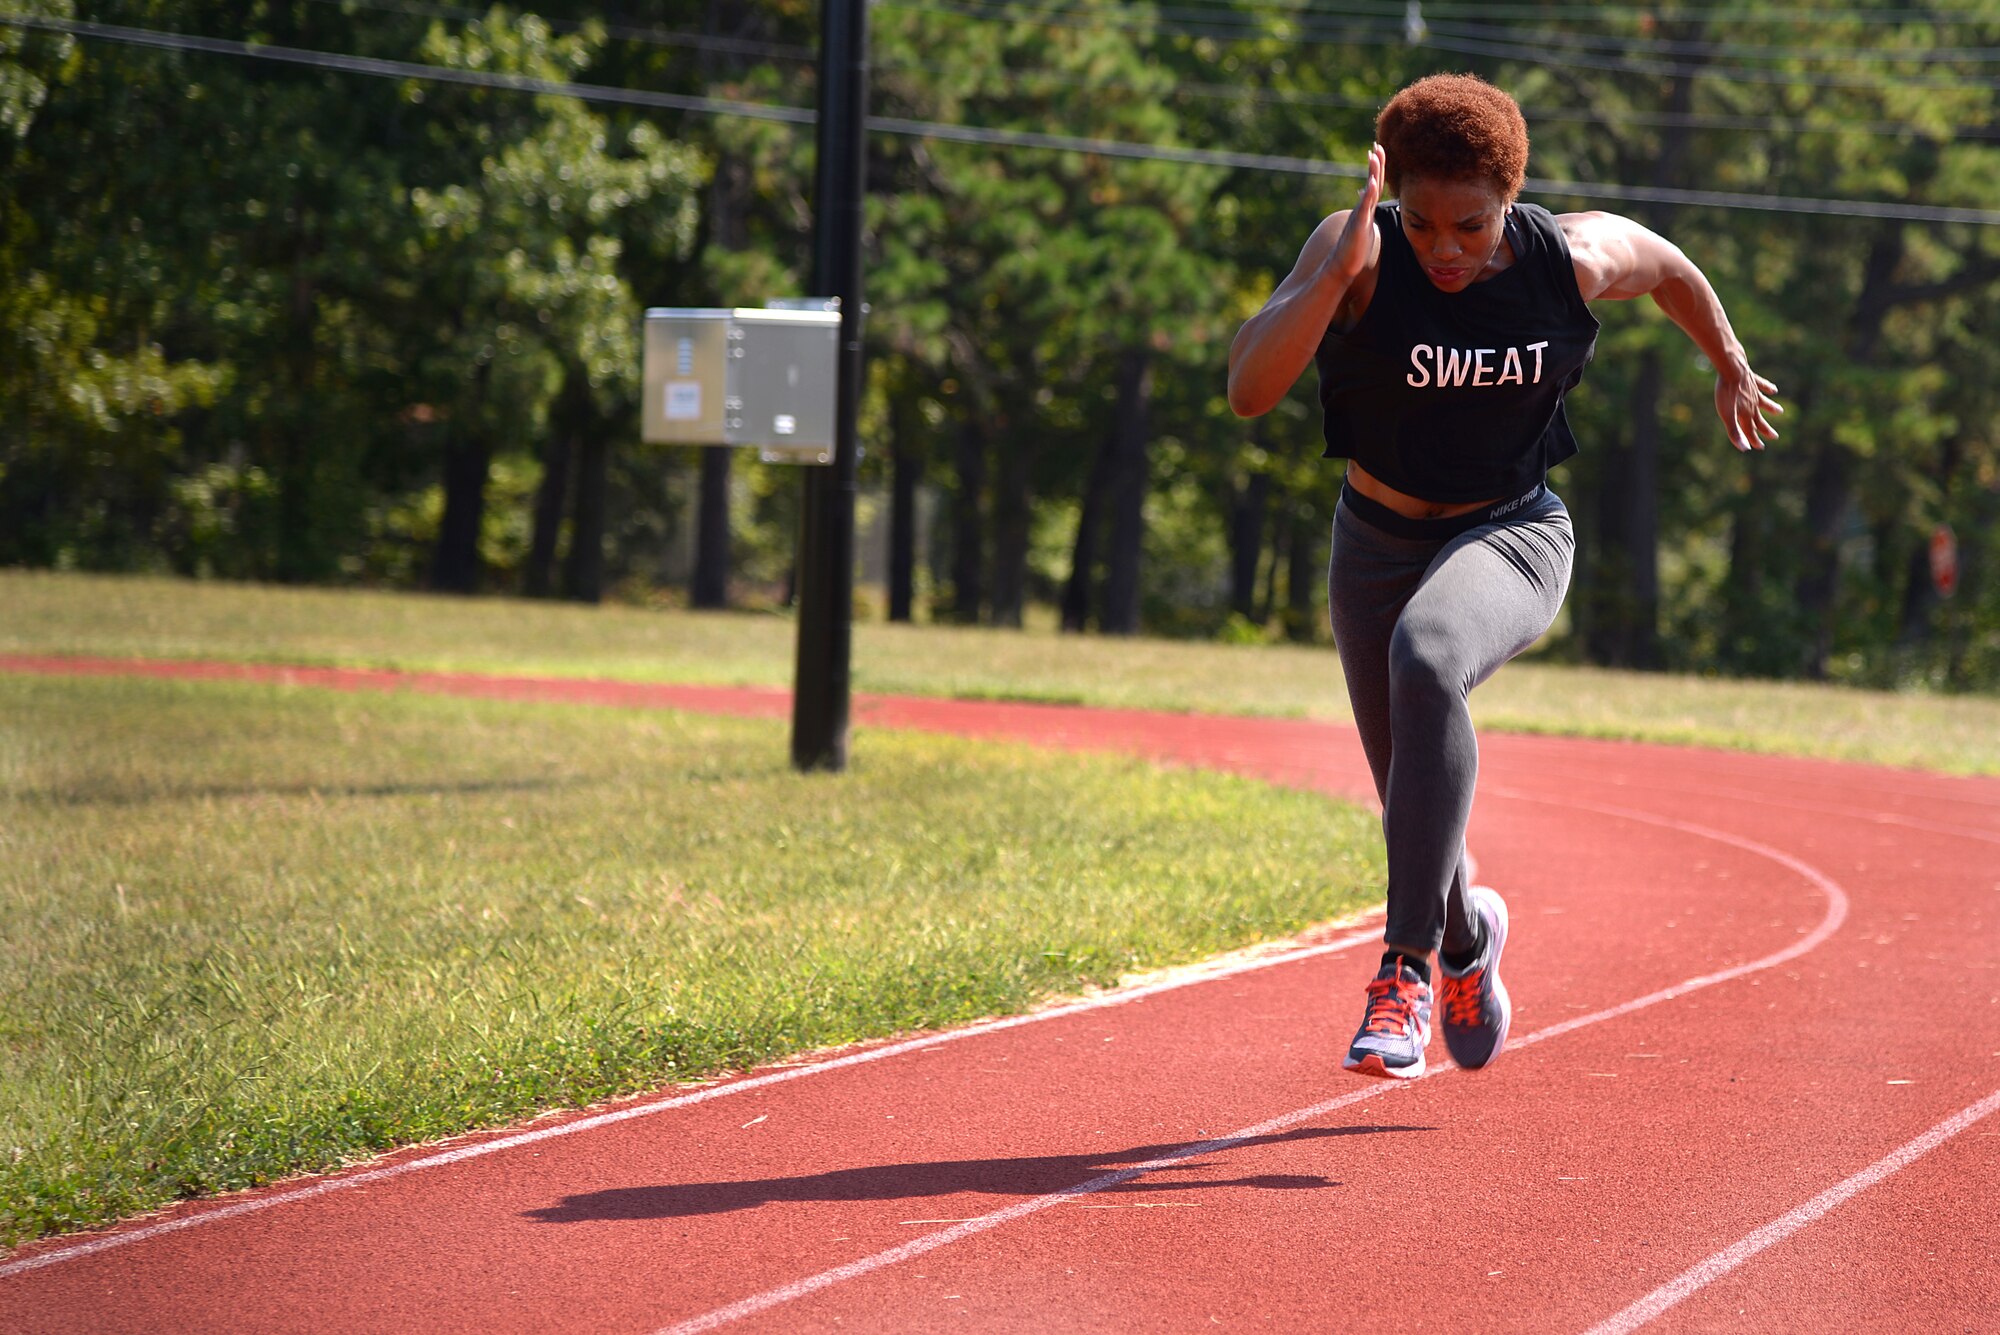 A photo of U.S. Air Force Tech. Sgt. Danielle R. Todman, a services journeyman with the 177th Fighter Wing, running on the base track.